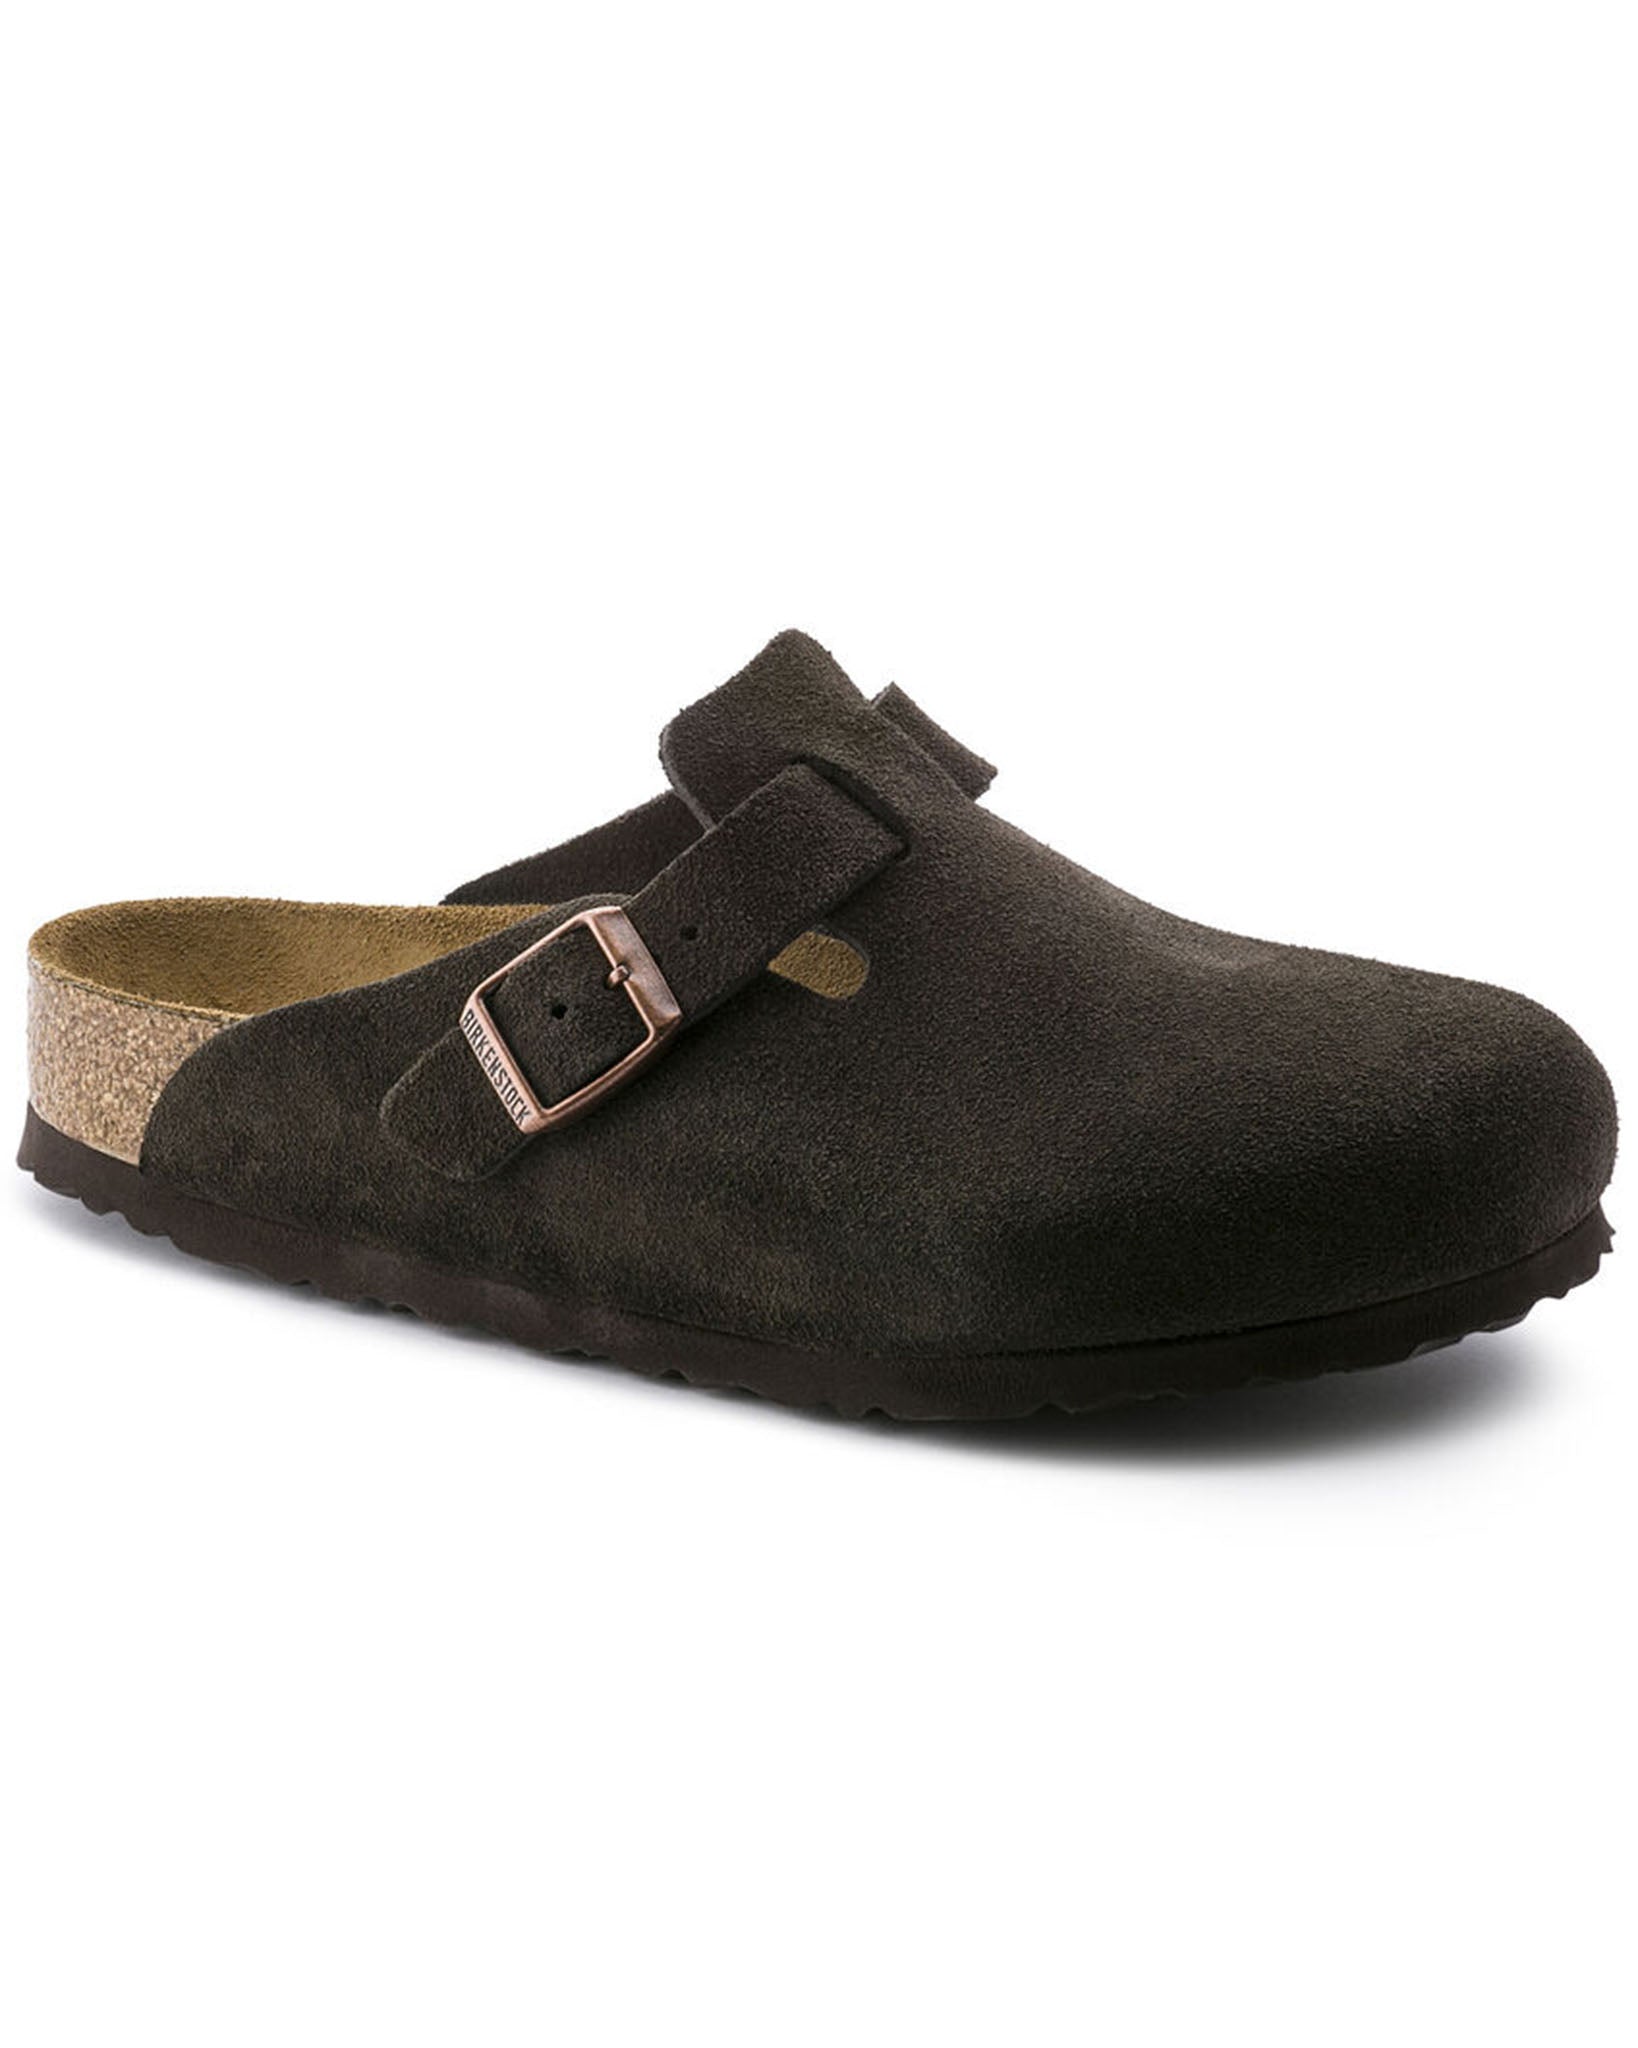 Boston Soft Footbed Mocha Suede Leather Clogs